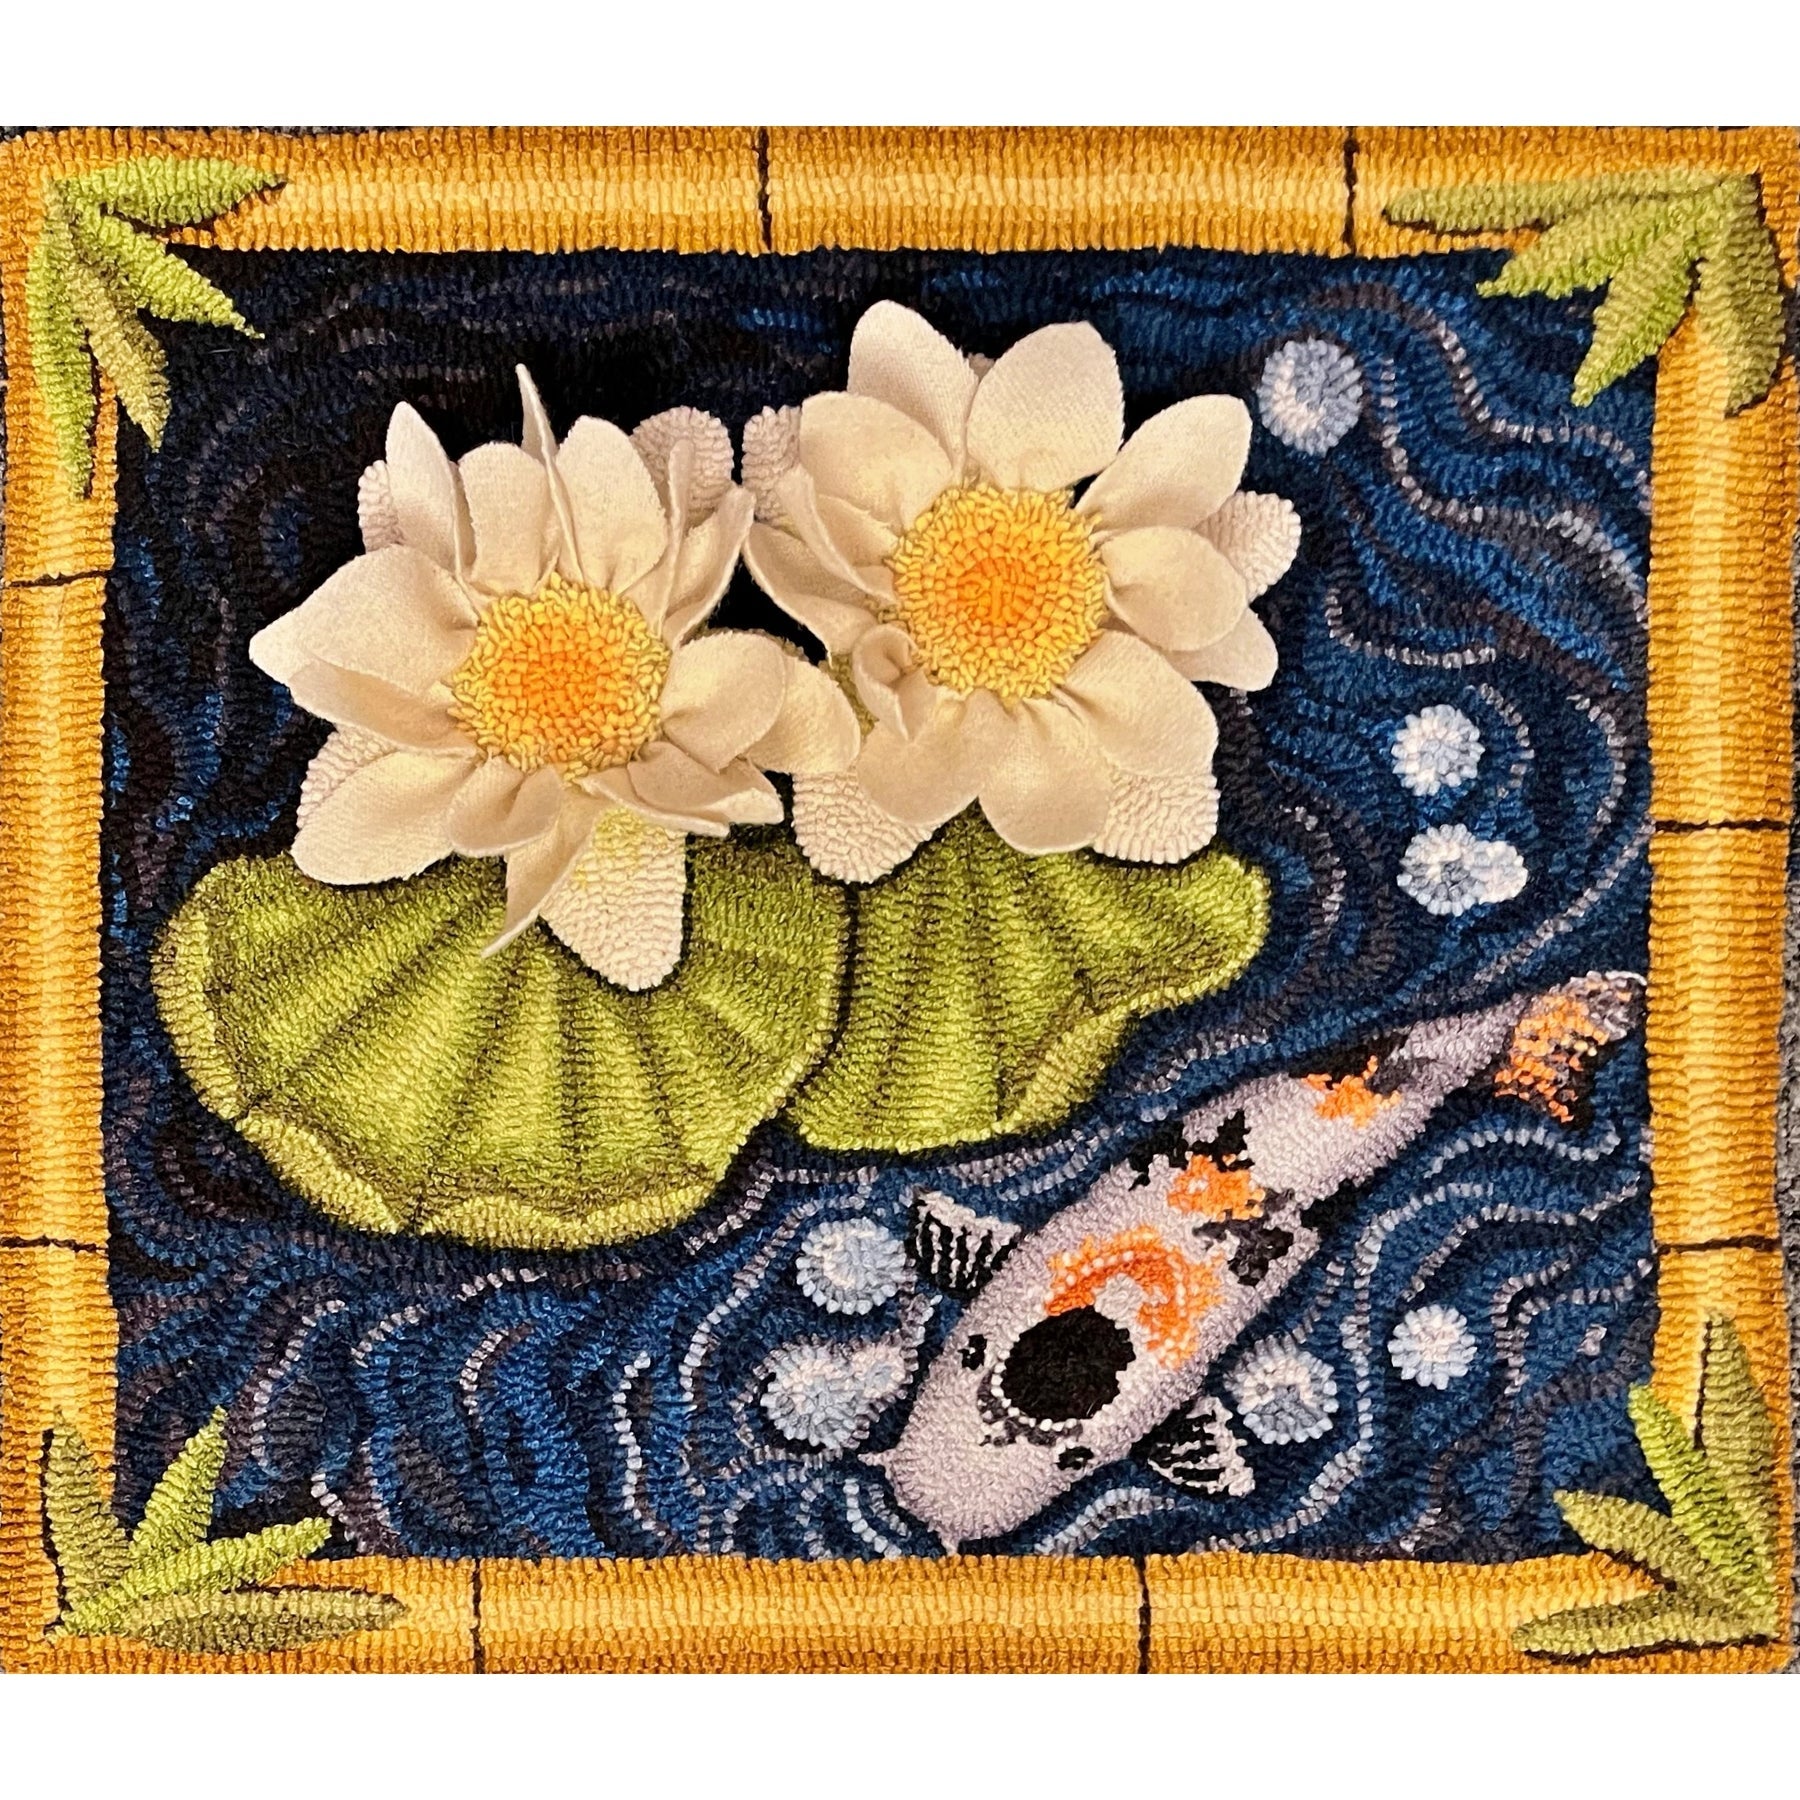 Lilies and Koi, rug hooked by Mary McGrath